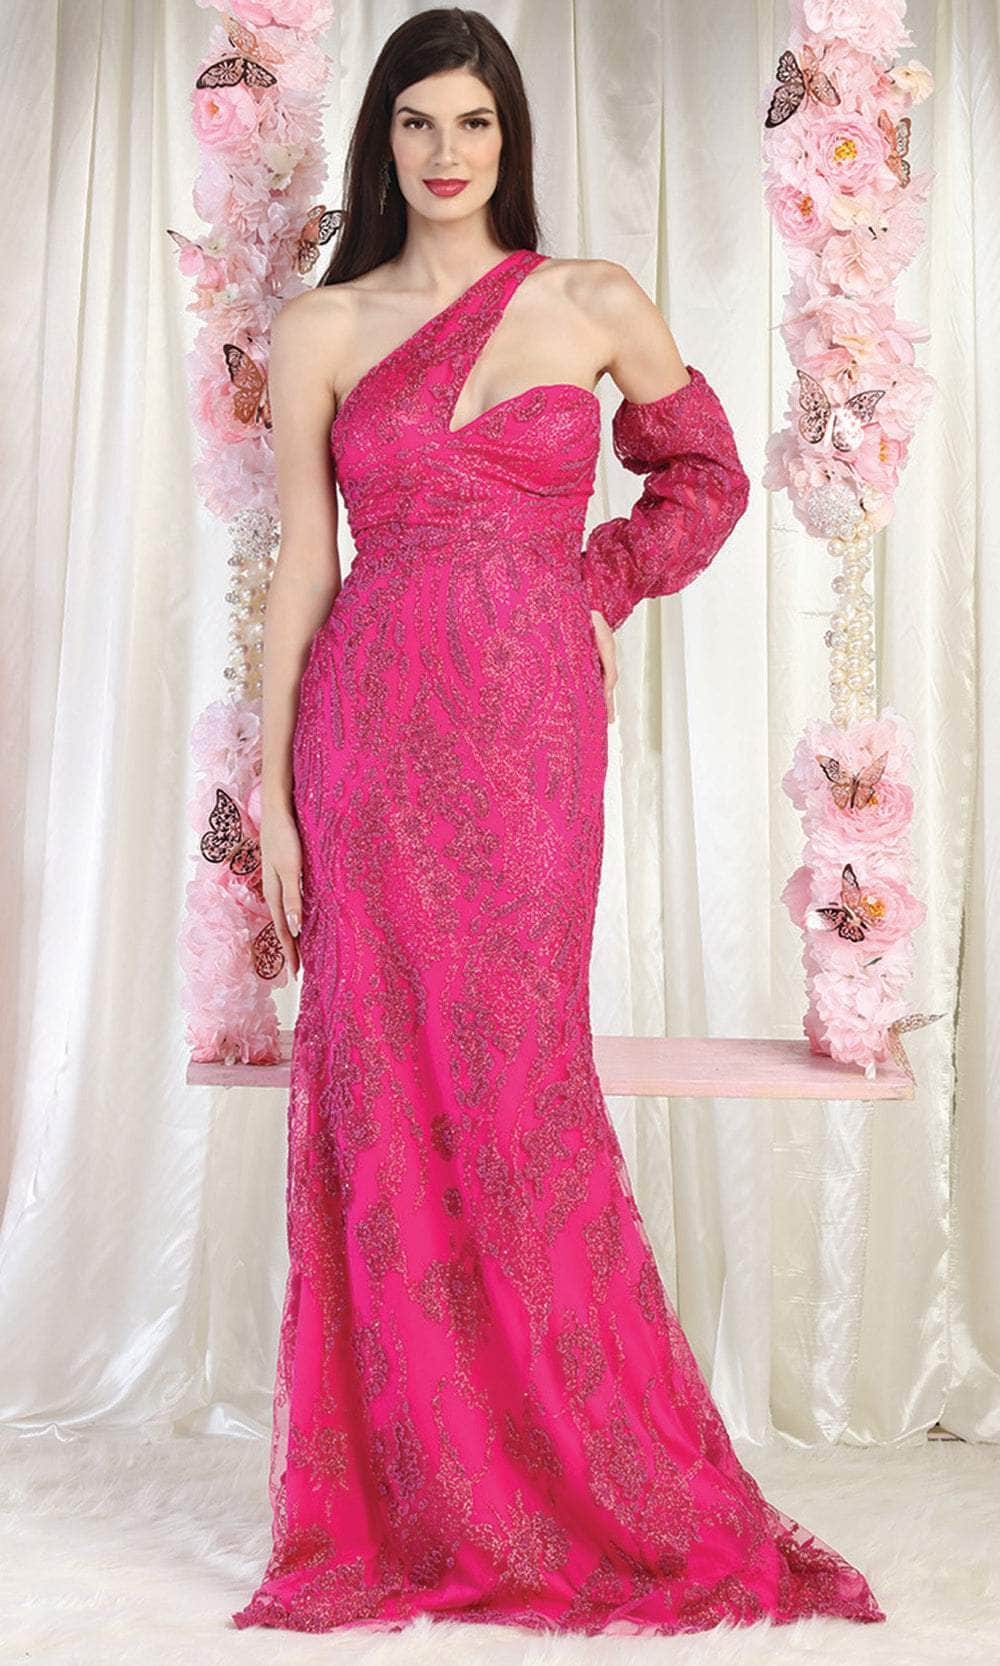 Image of May Queen RQ7997 - Asymmetrical Embellished Gown